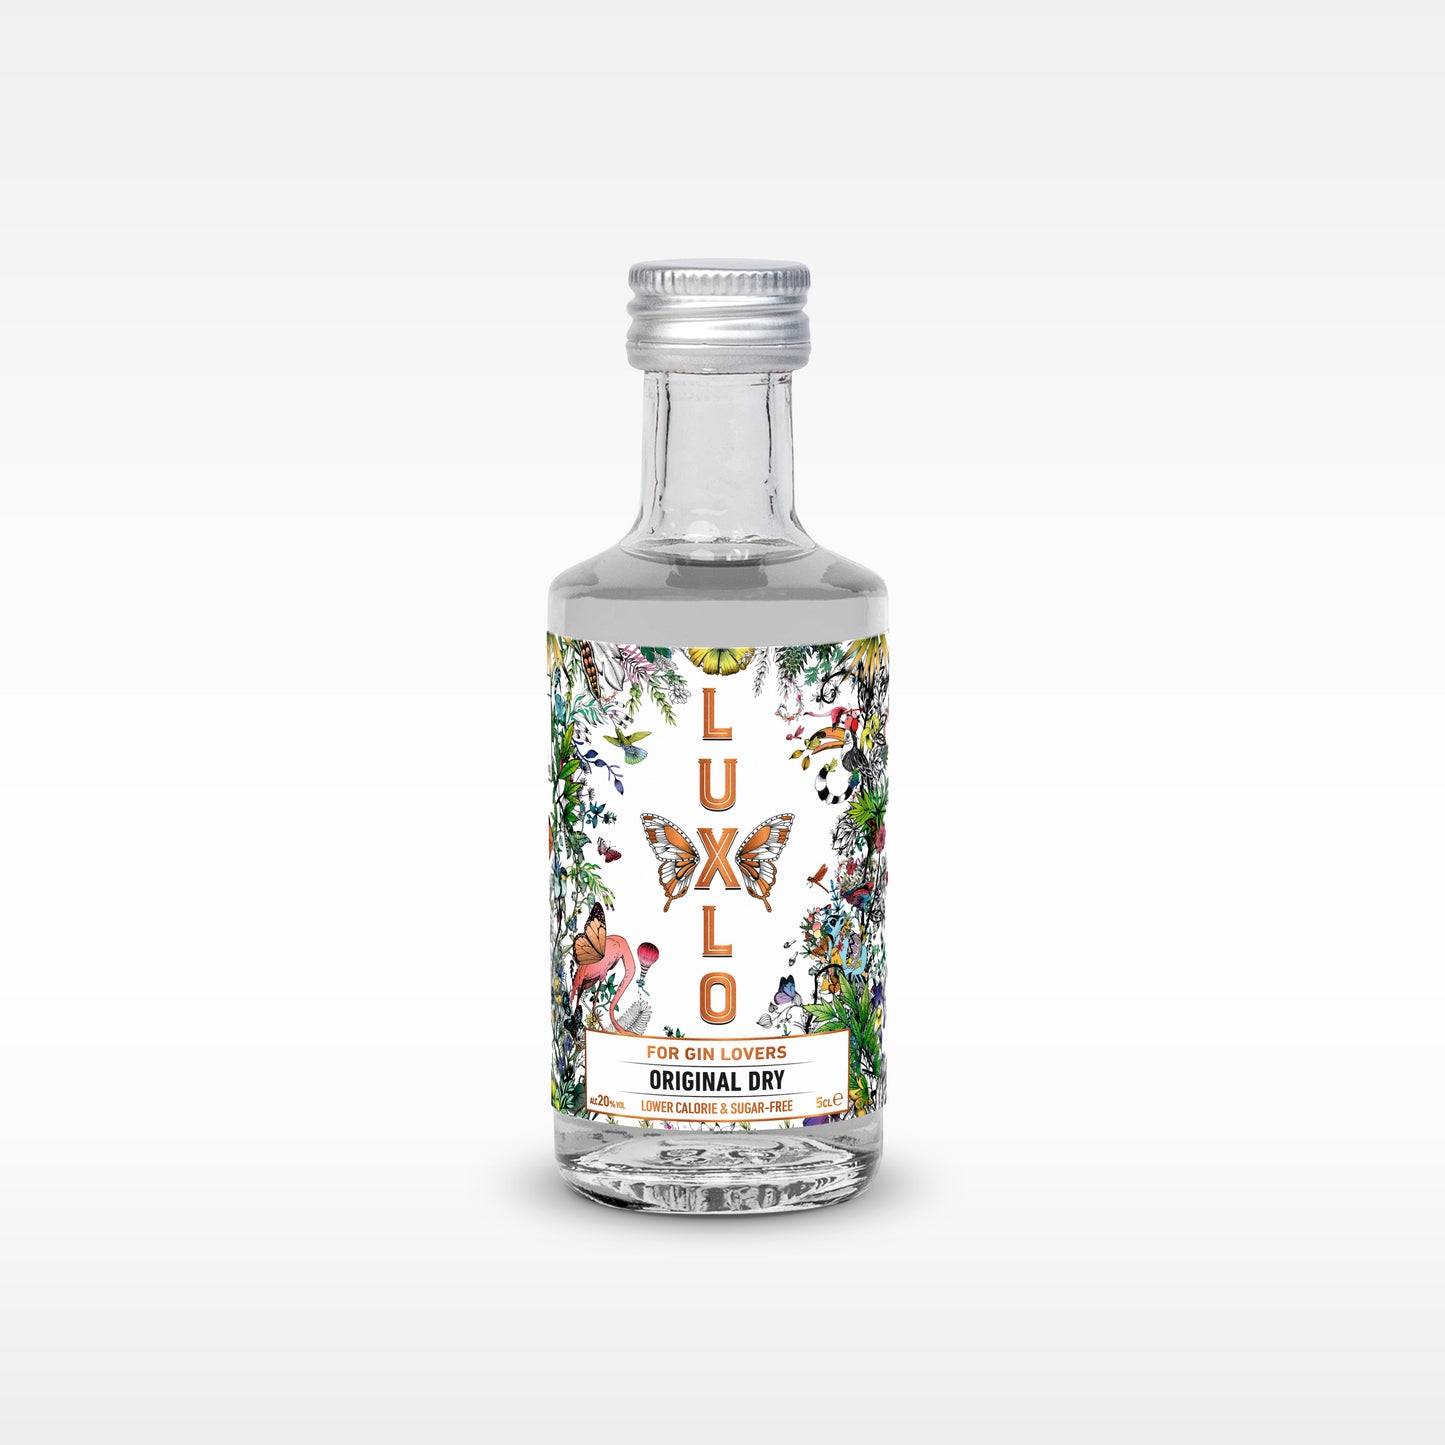 LUXLO Original Dry for Gin Lovers Miniature